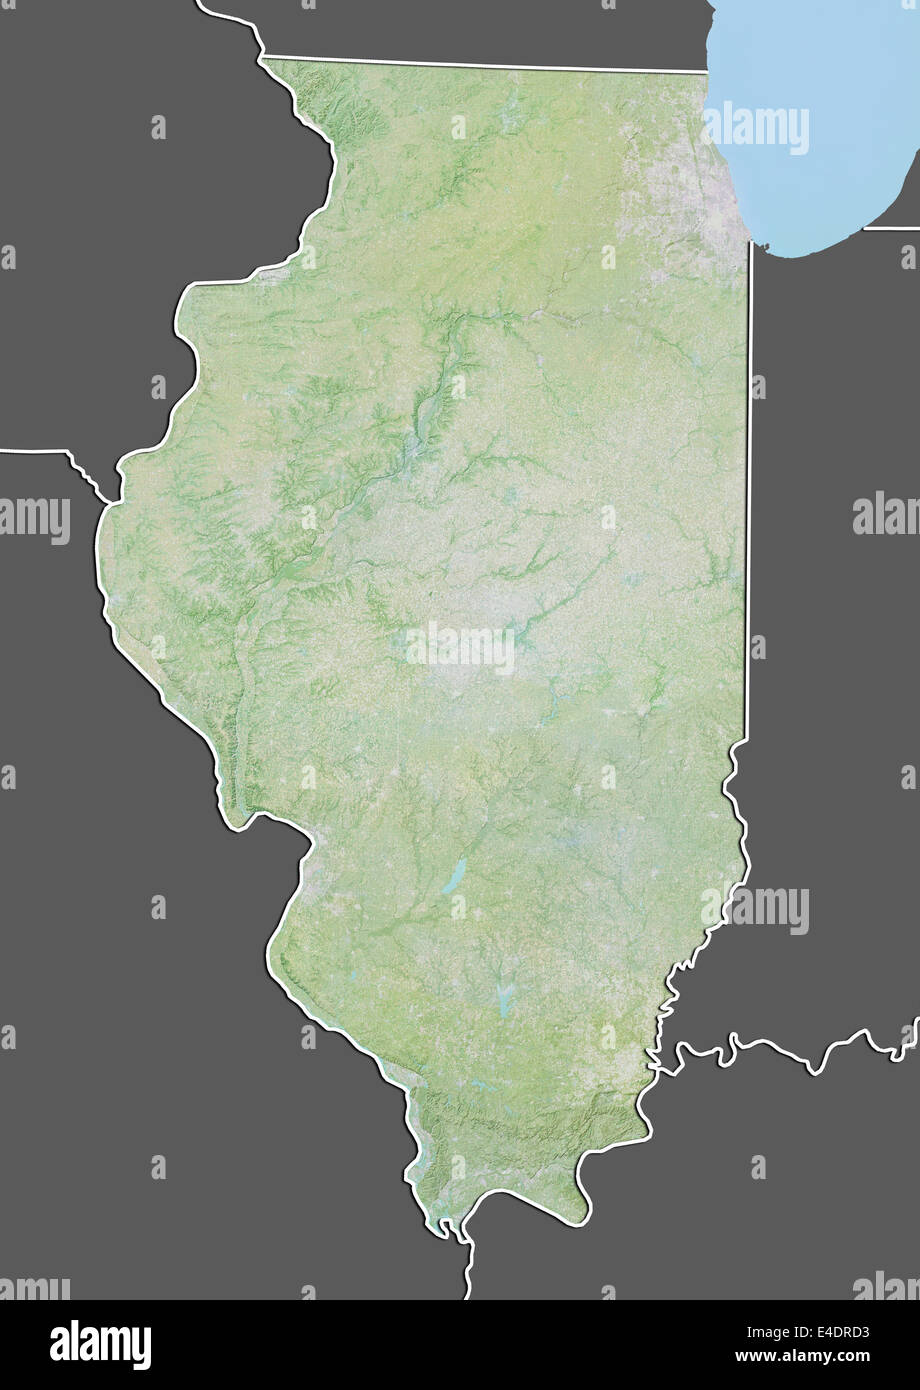 State of Illinois, United States, Relief Map Stock Photo Alamy